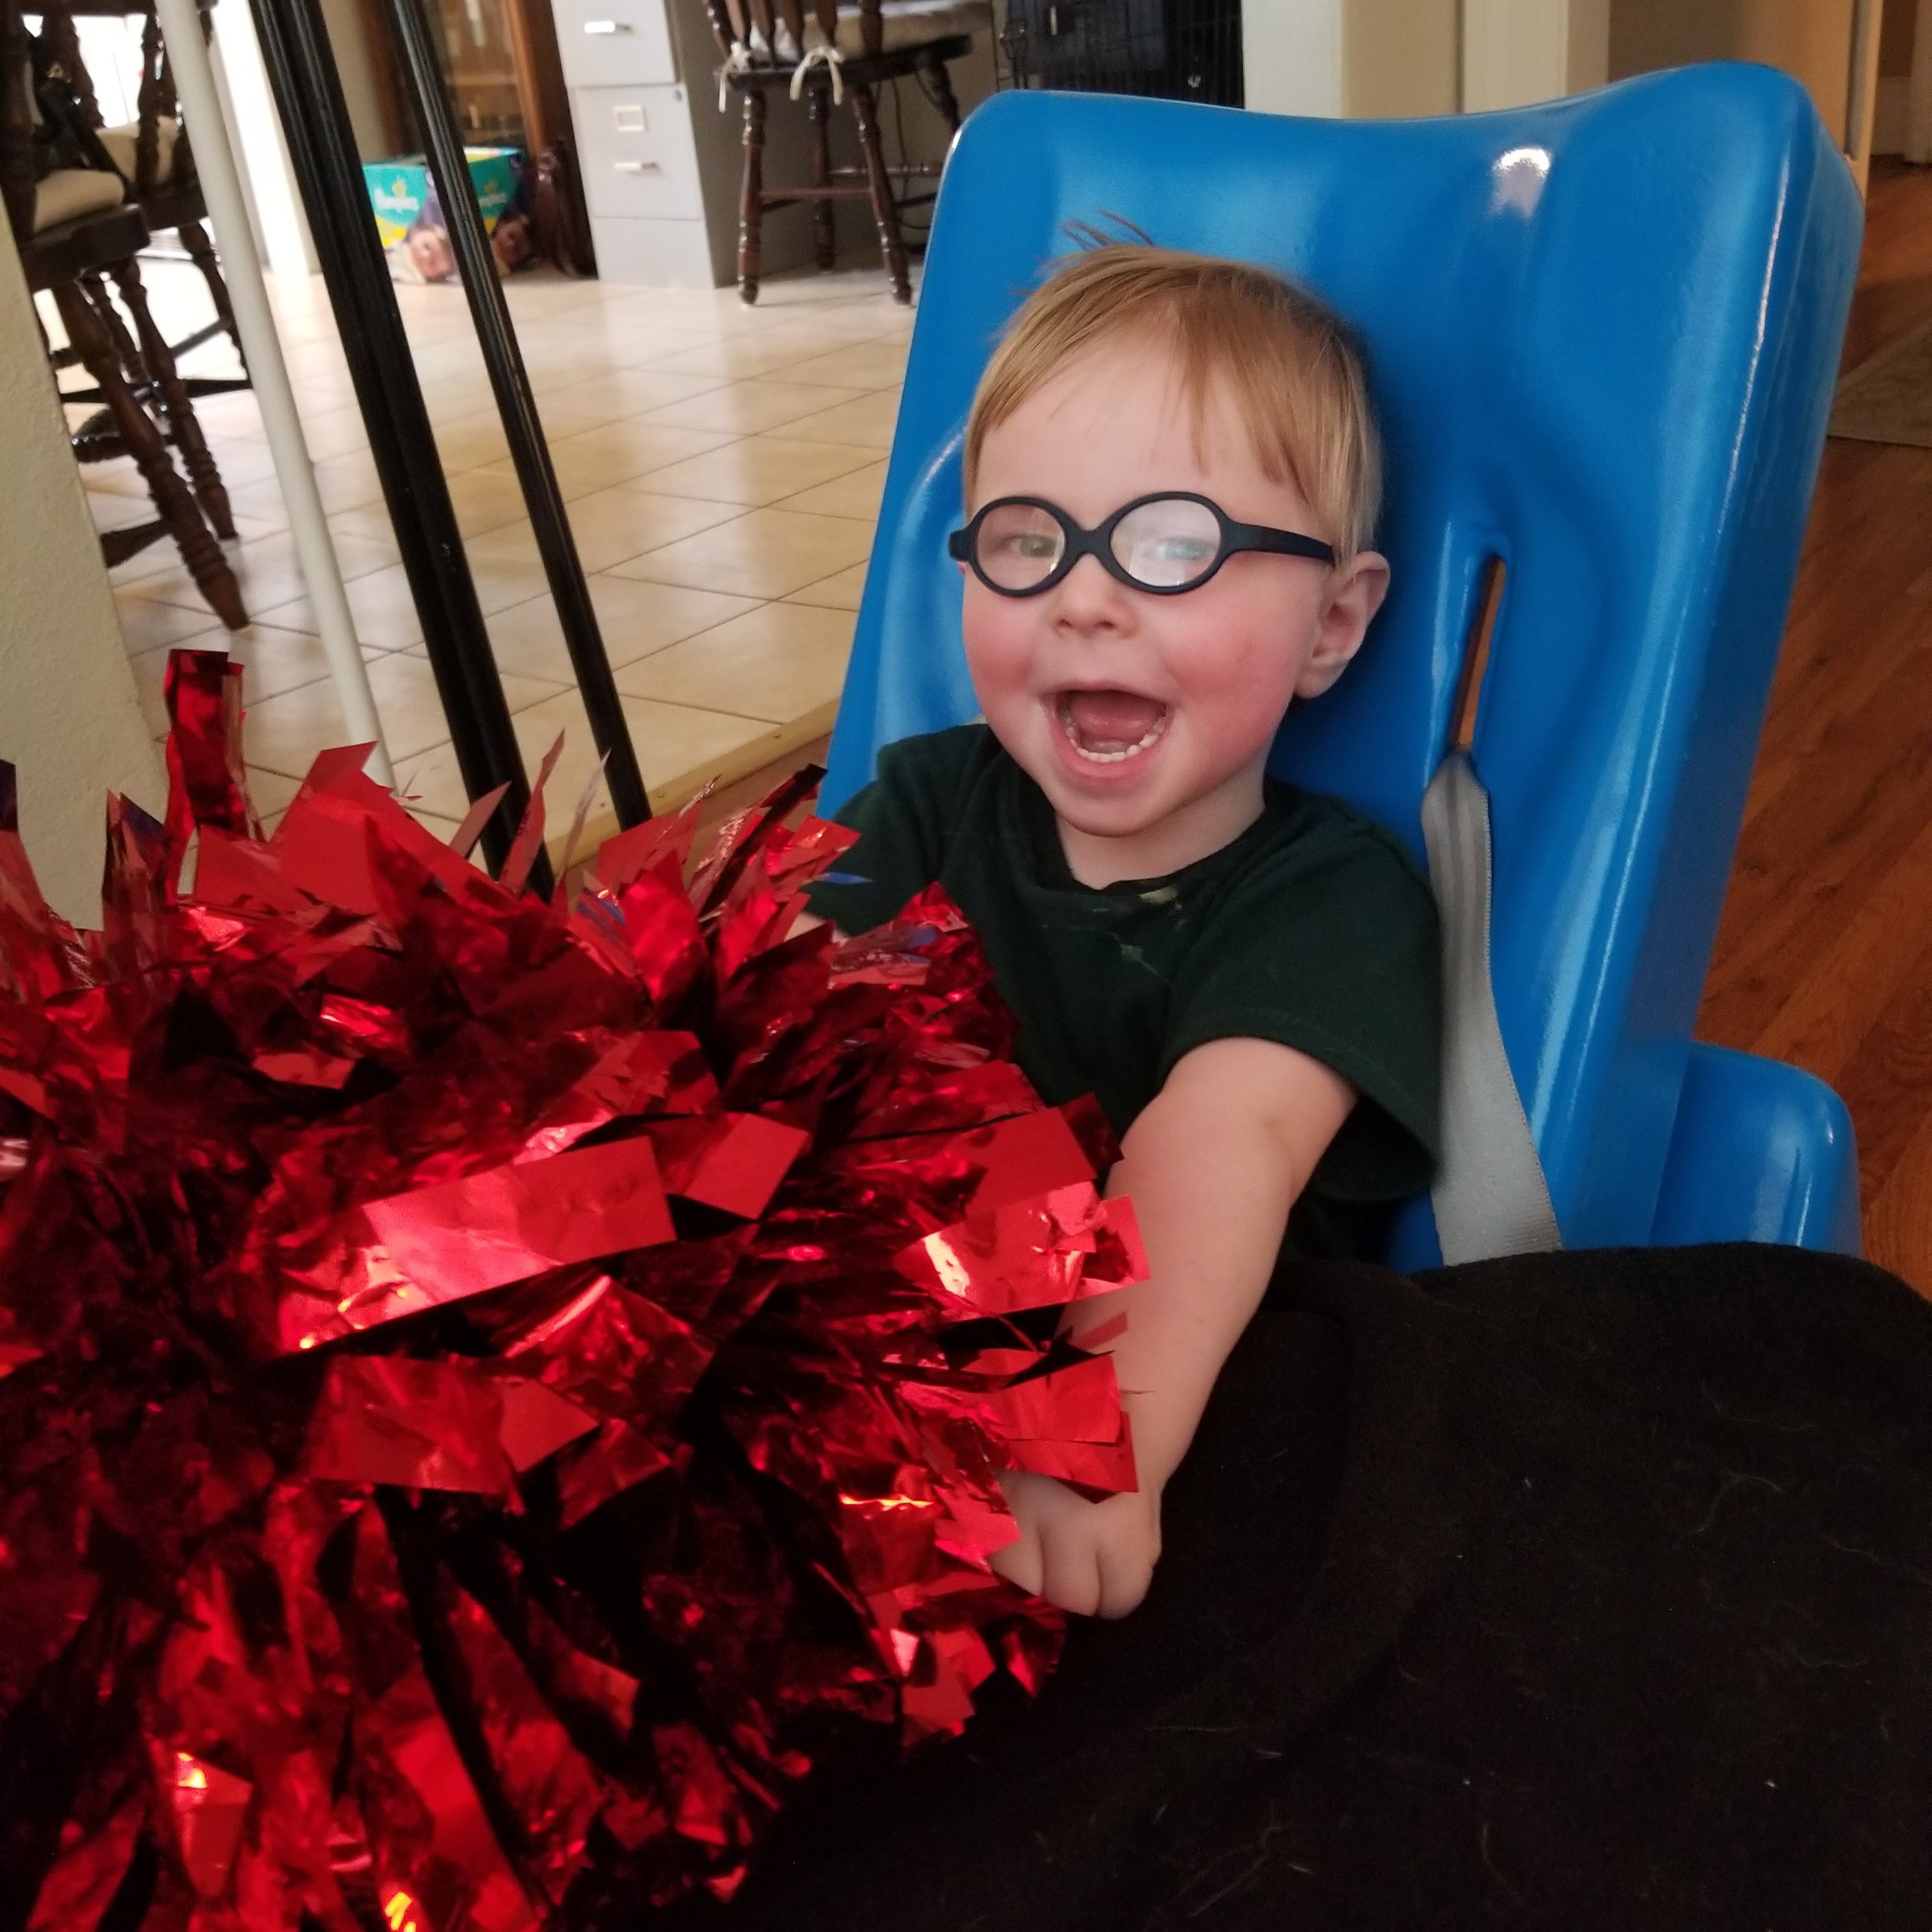 Toddler wearing glasses smiles excitedly as he plays with flashy red pompom.